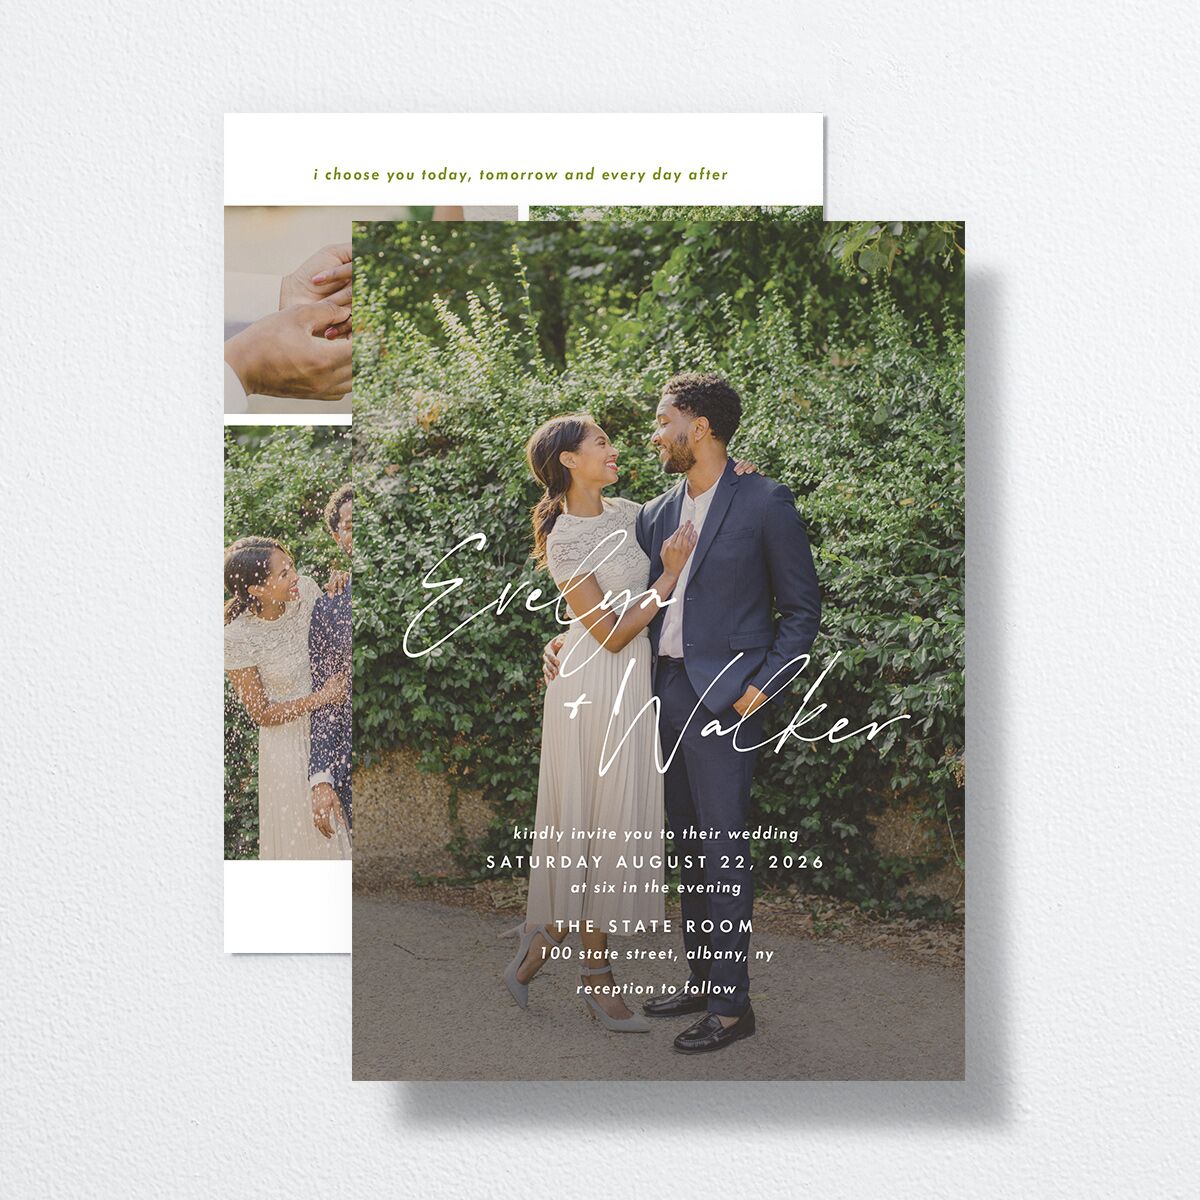 Picture This Wedding Invitations front-and-back in Green